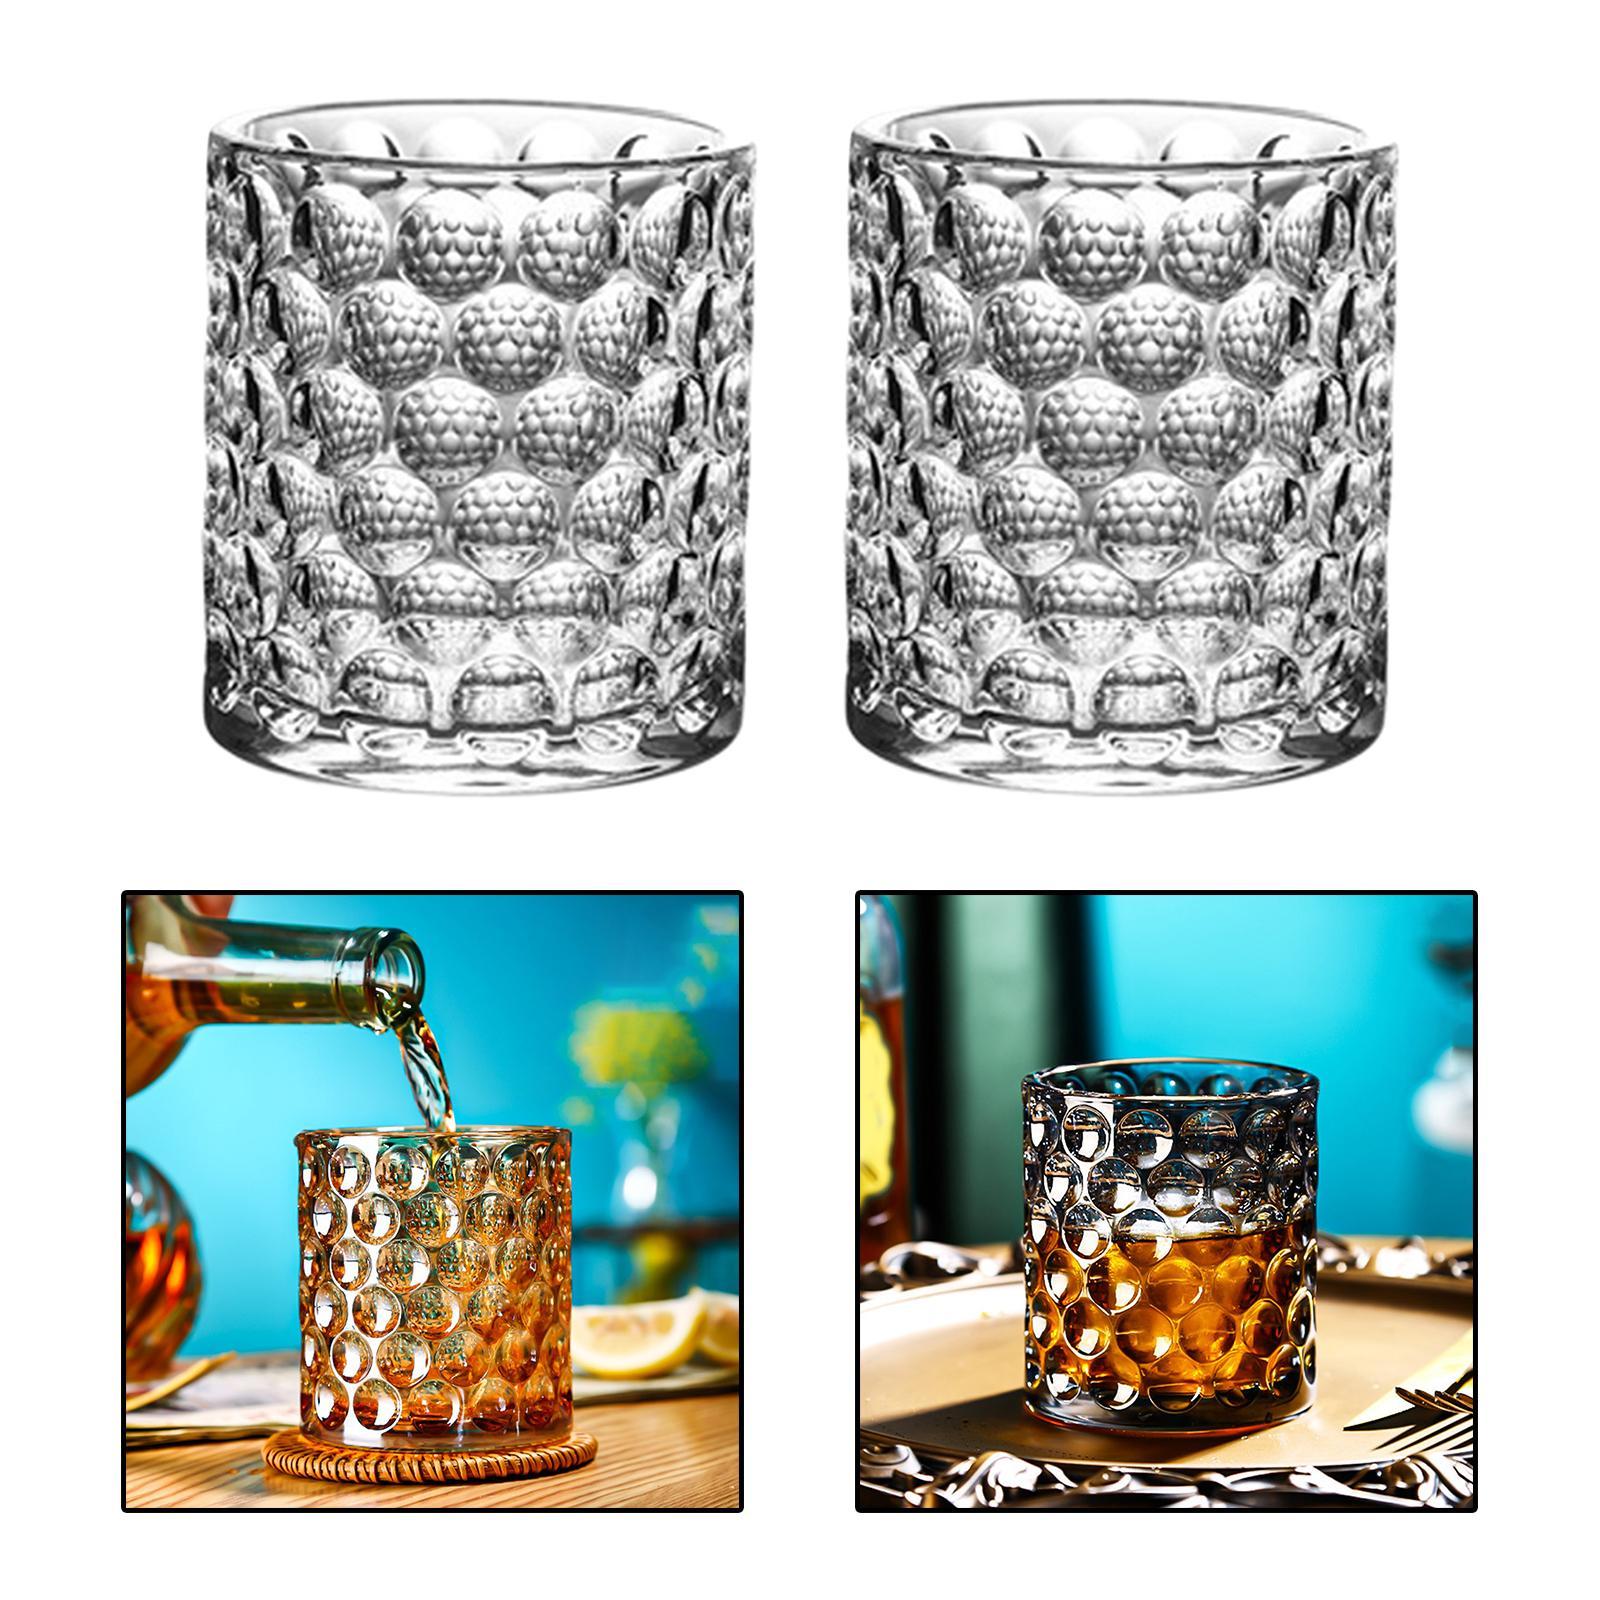 Glass Cup Coffee Cup for Office Desktop Home Kitchen Dining Room KTV Bar Leisure Places